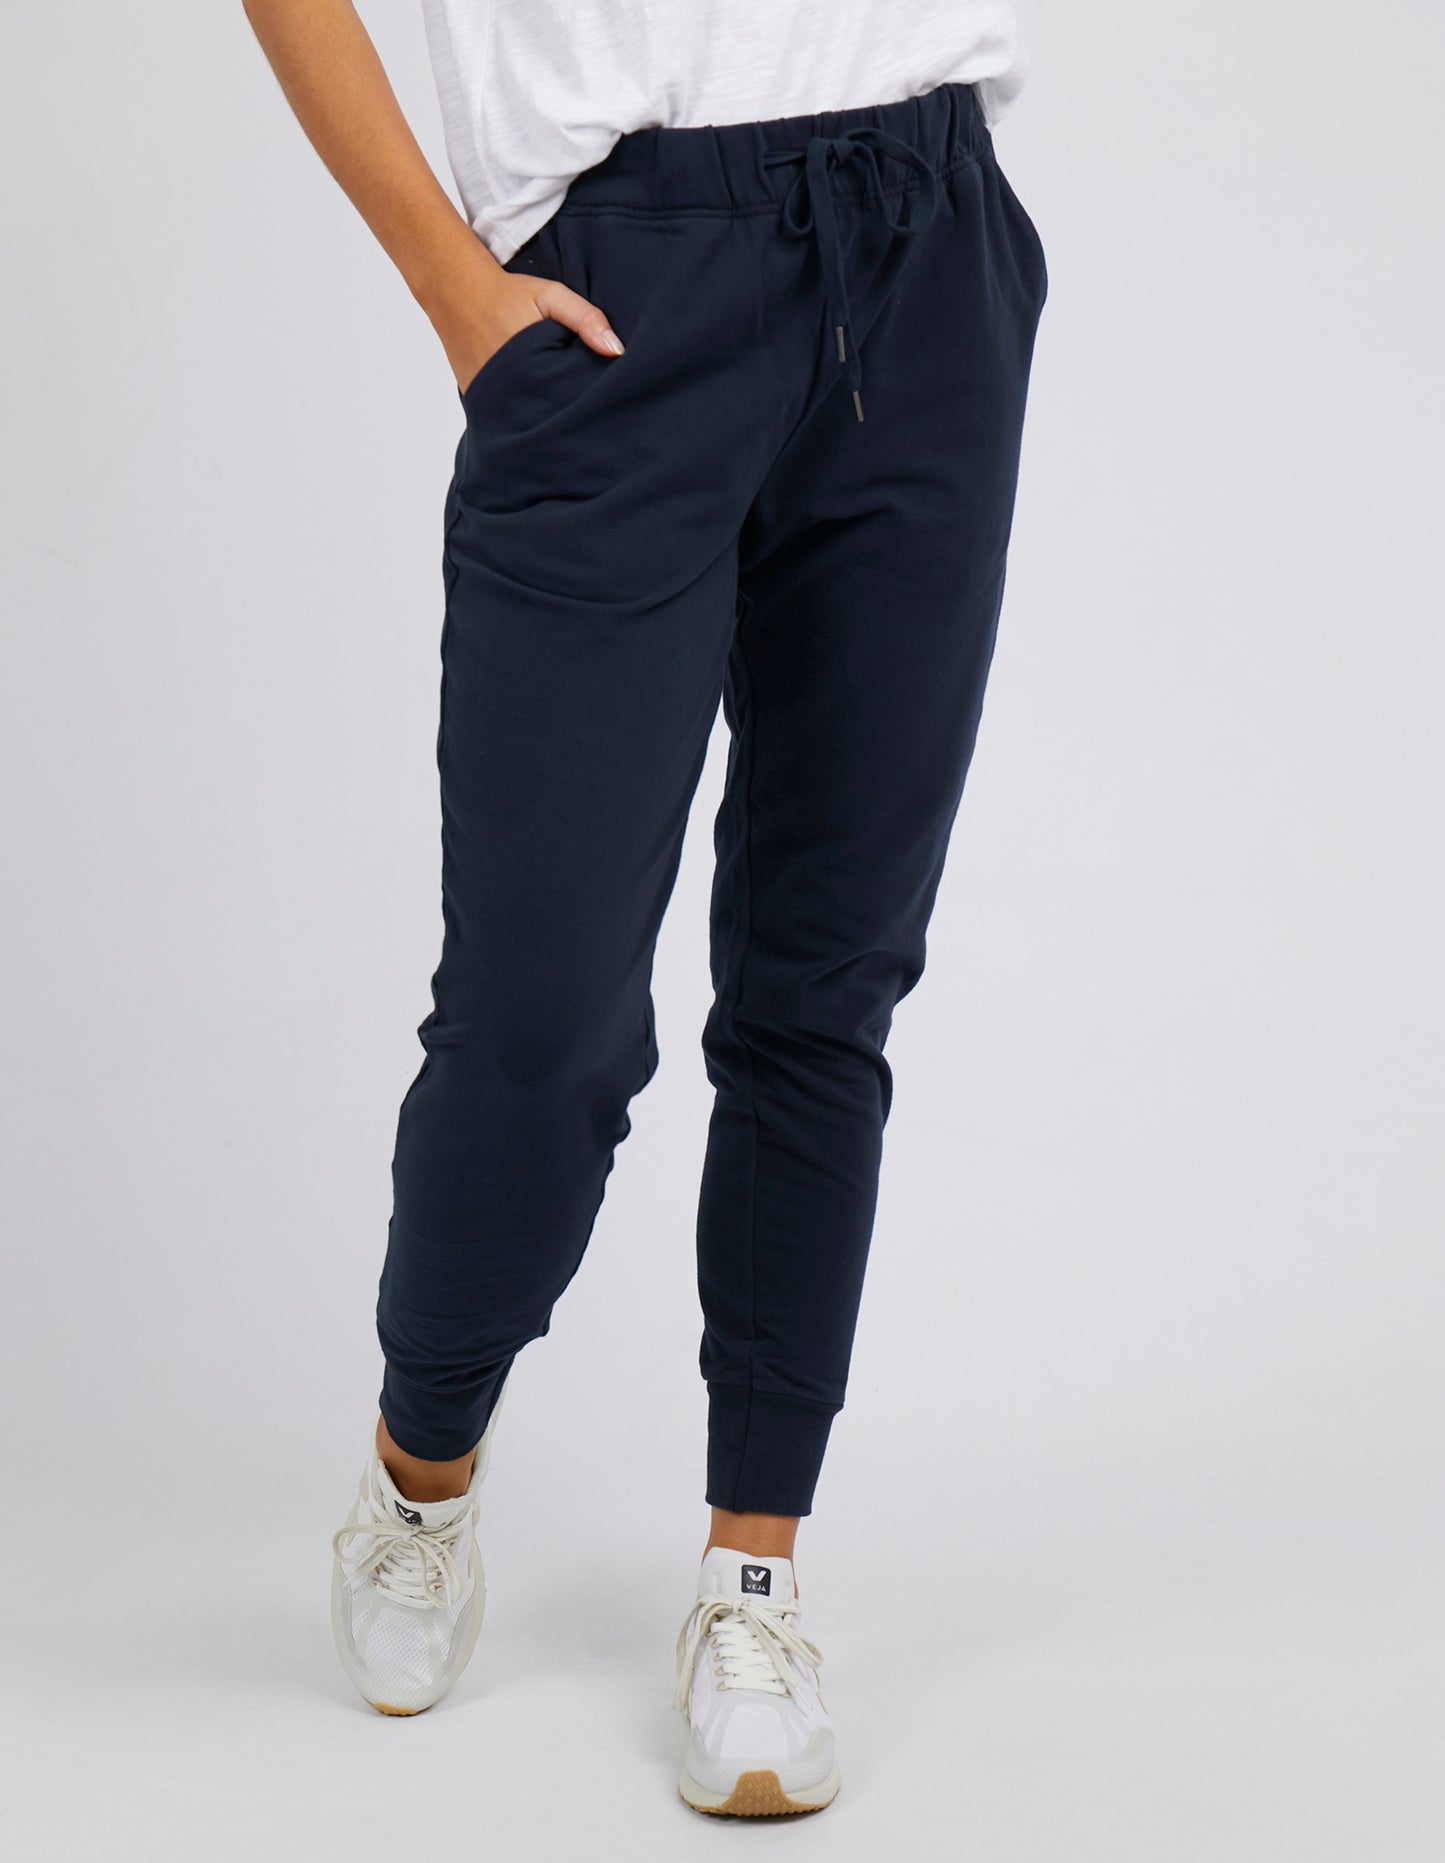 Lazy Days Pants - Navy - Foxwood - FUDGE Gifts Home Lifestyle